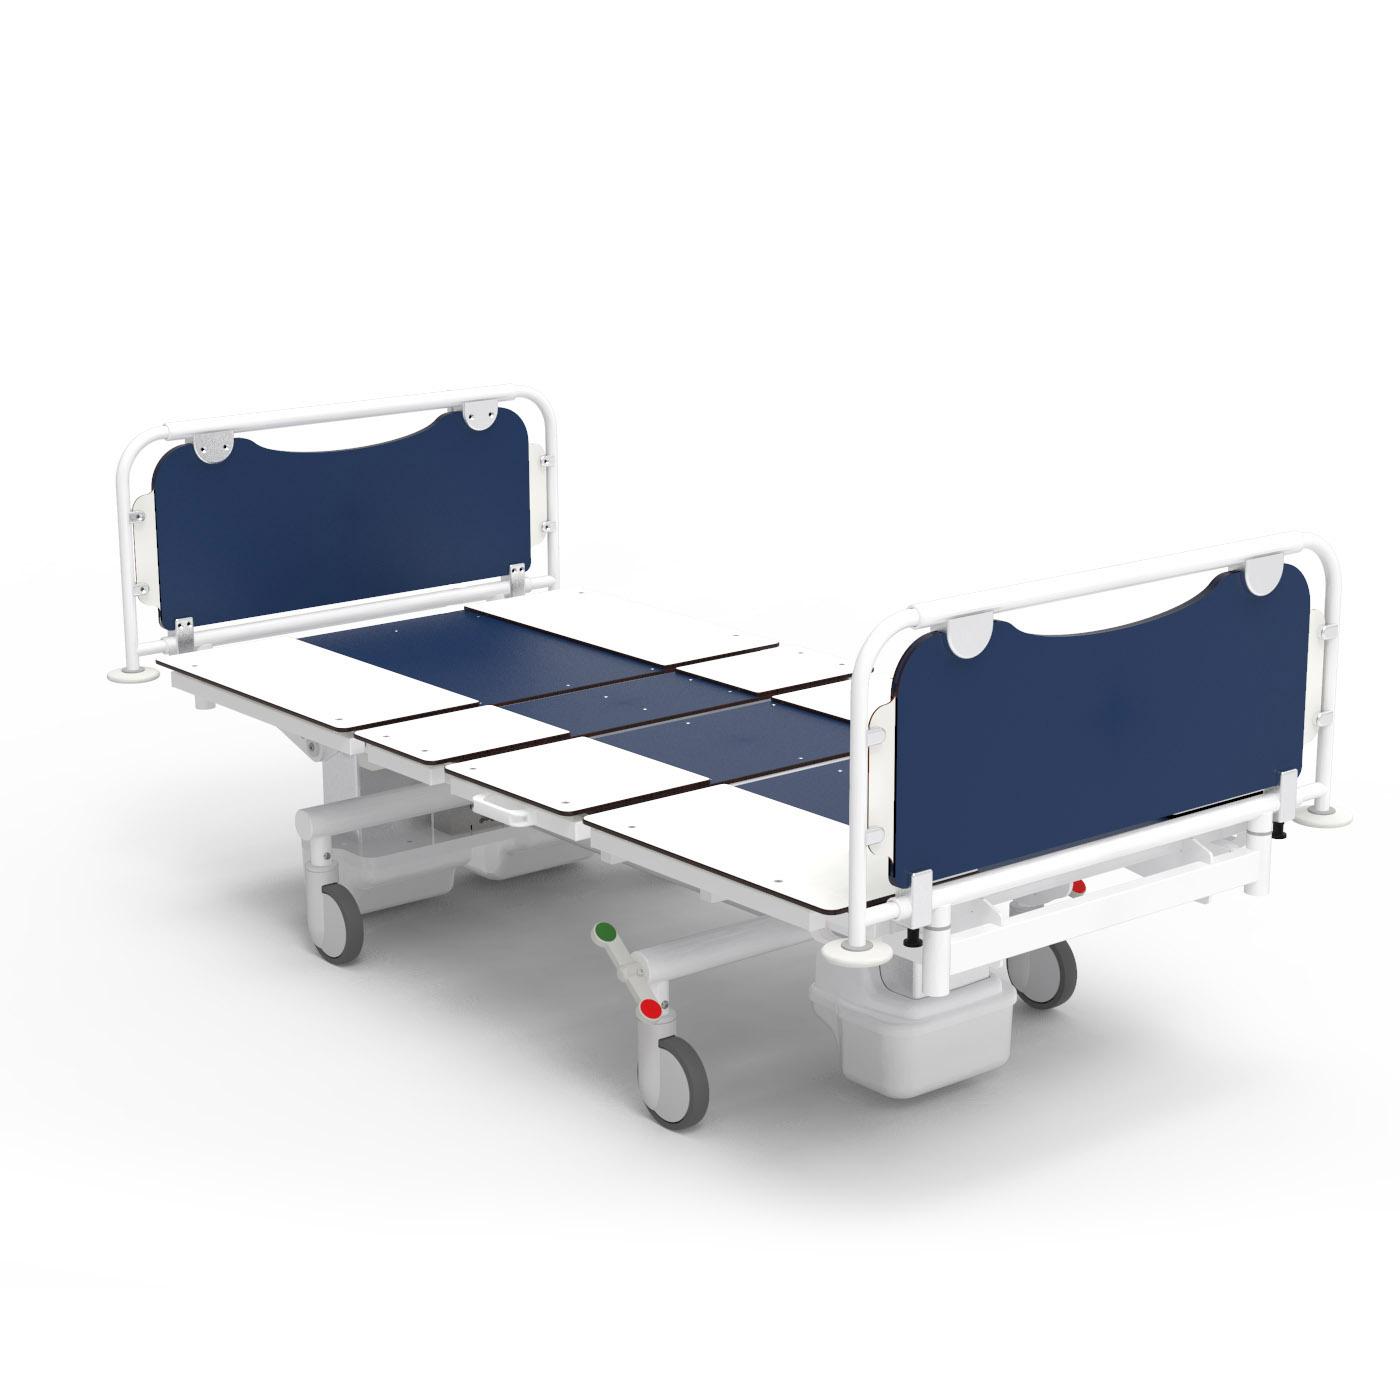 Bariatric beds